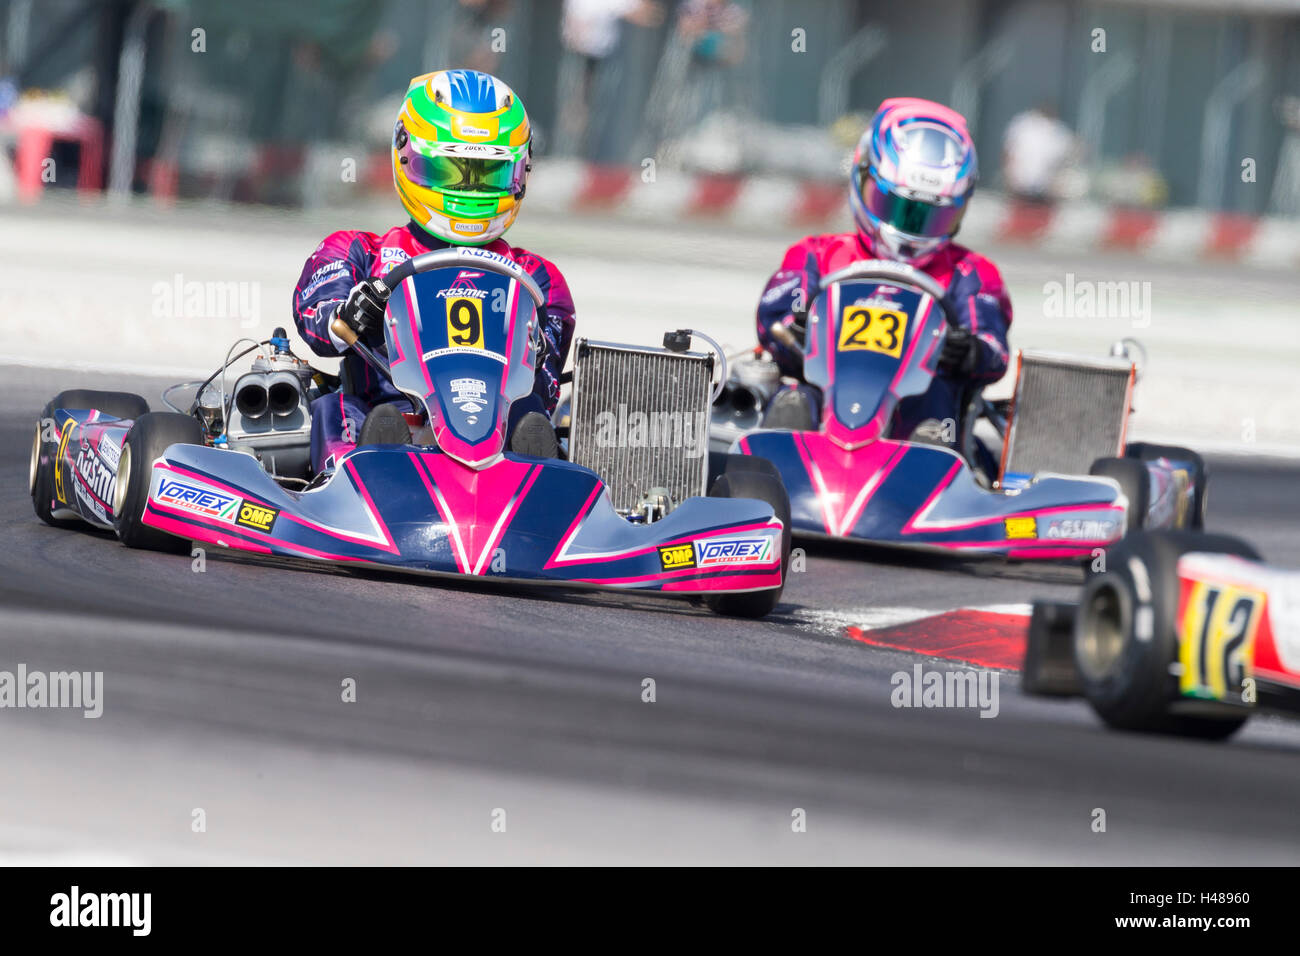 Adria, Rovigo (Italy) - October 1, 2016: Kosmic Racing Team, driven by Bengtsson Axel during eliminatory heat in the Wsk Final Stock Photo